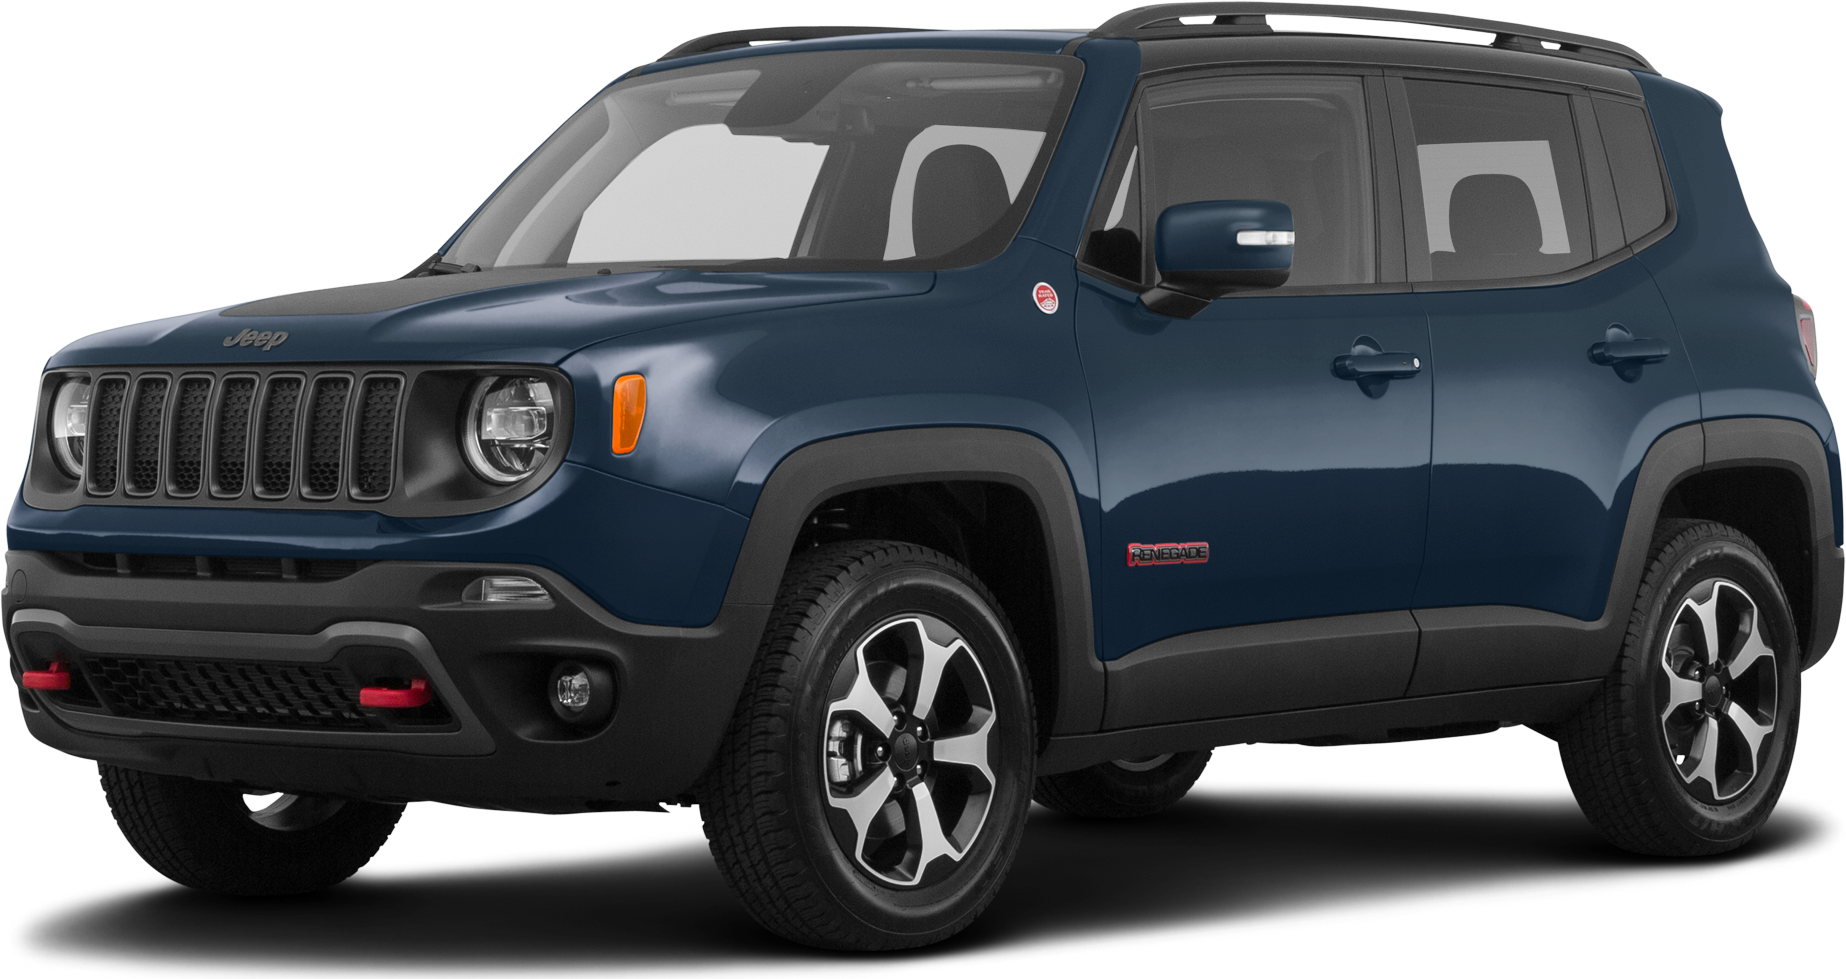 2020 Jeep Renegade Price, Value, Ratings & Reviews